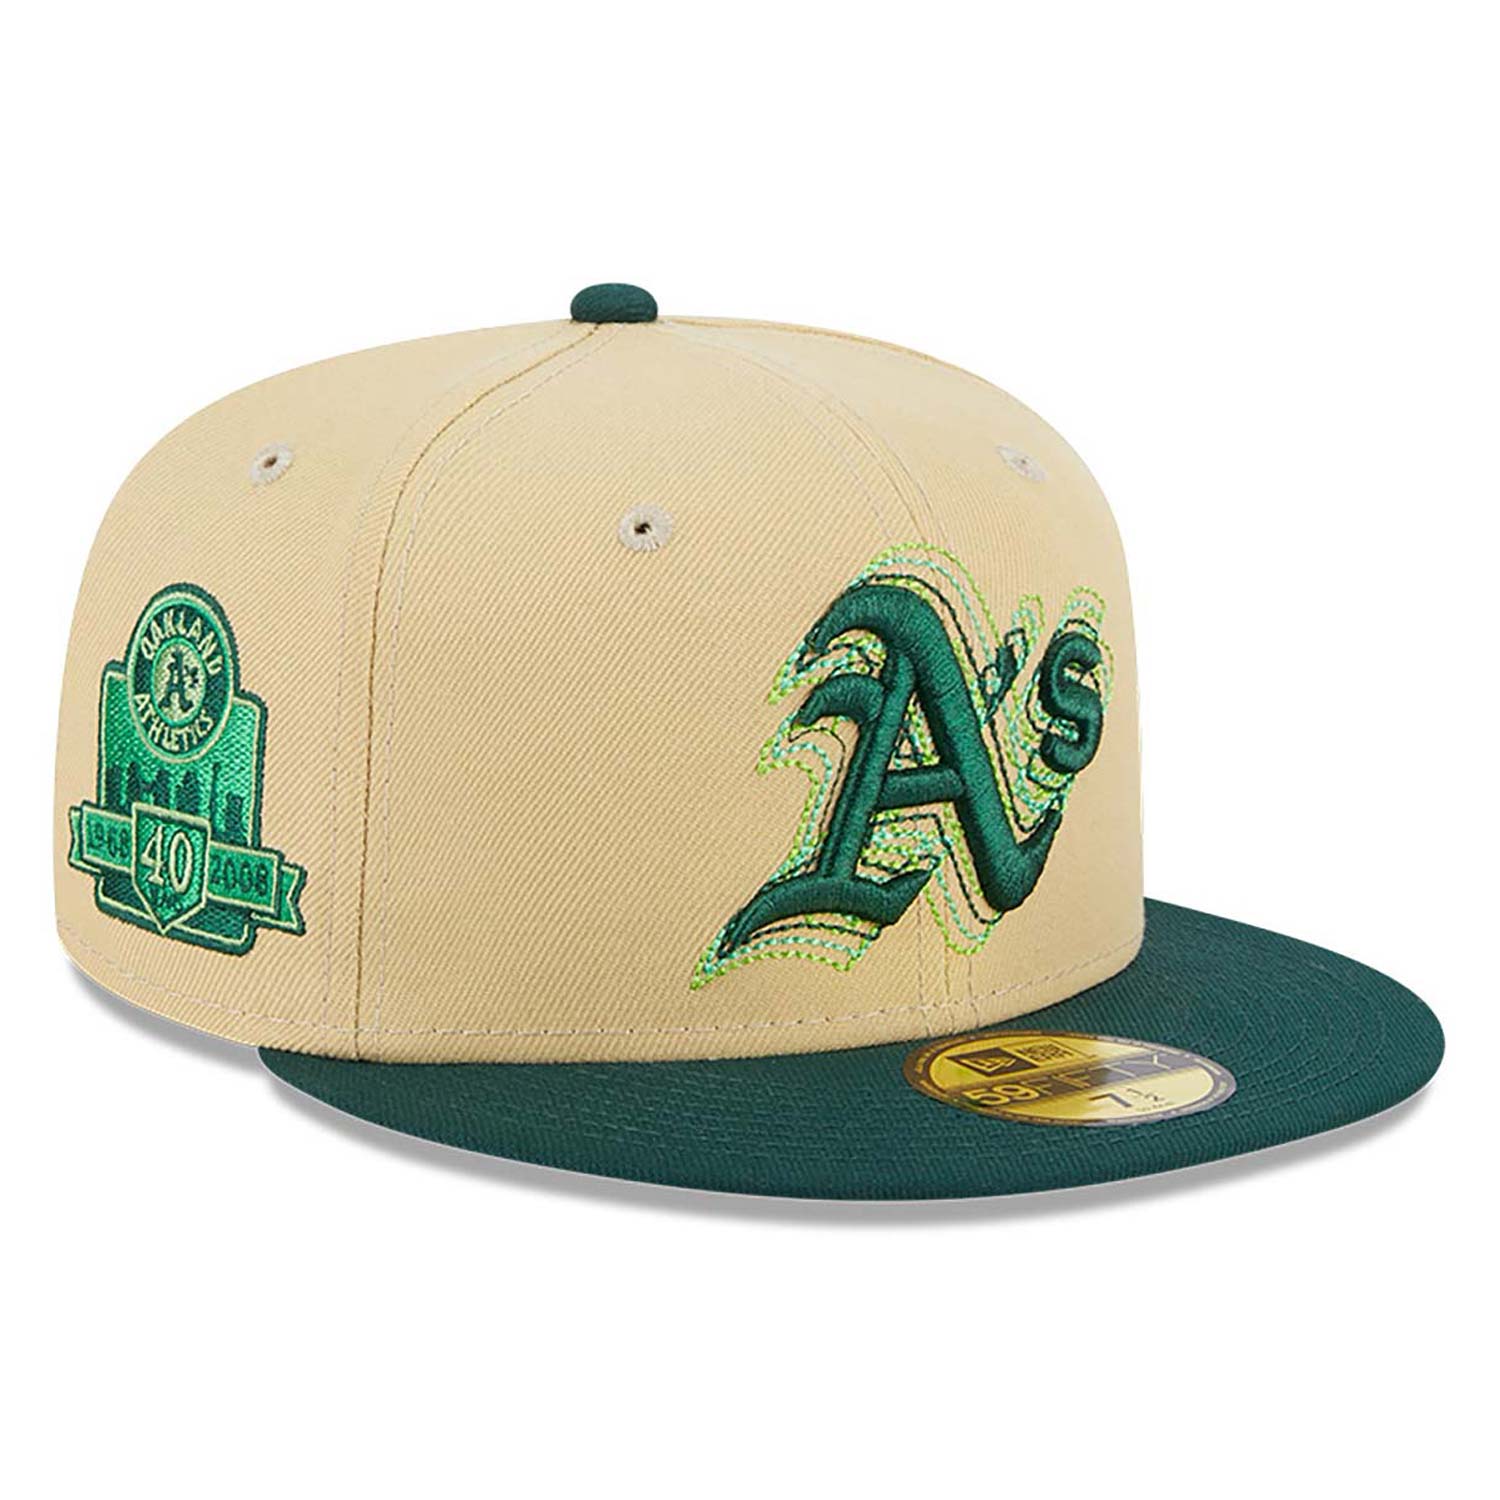 Oakland Athletics Illusion Stone 59FIFTY Fitted Cap